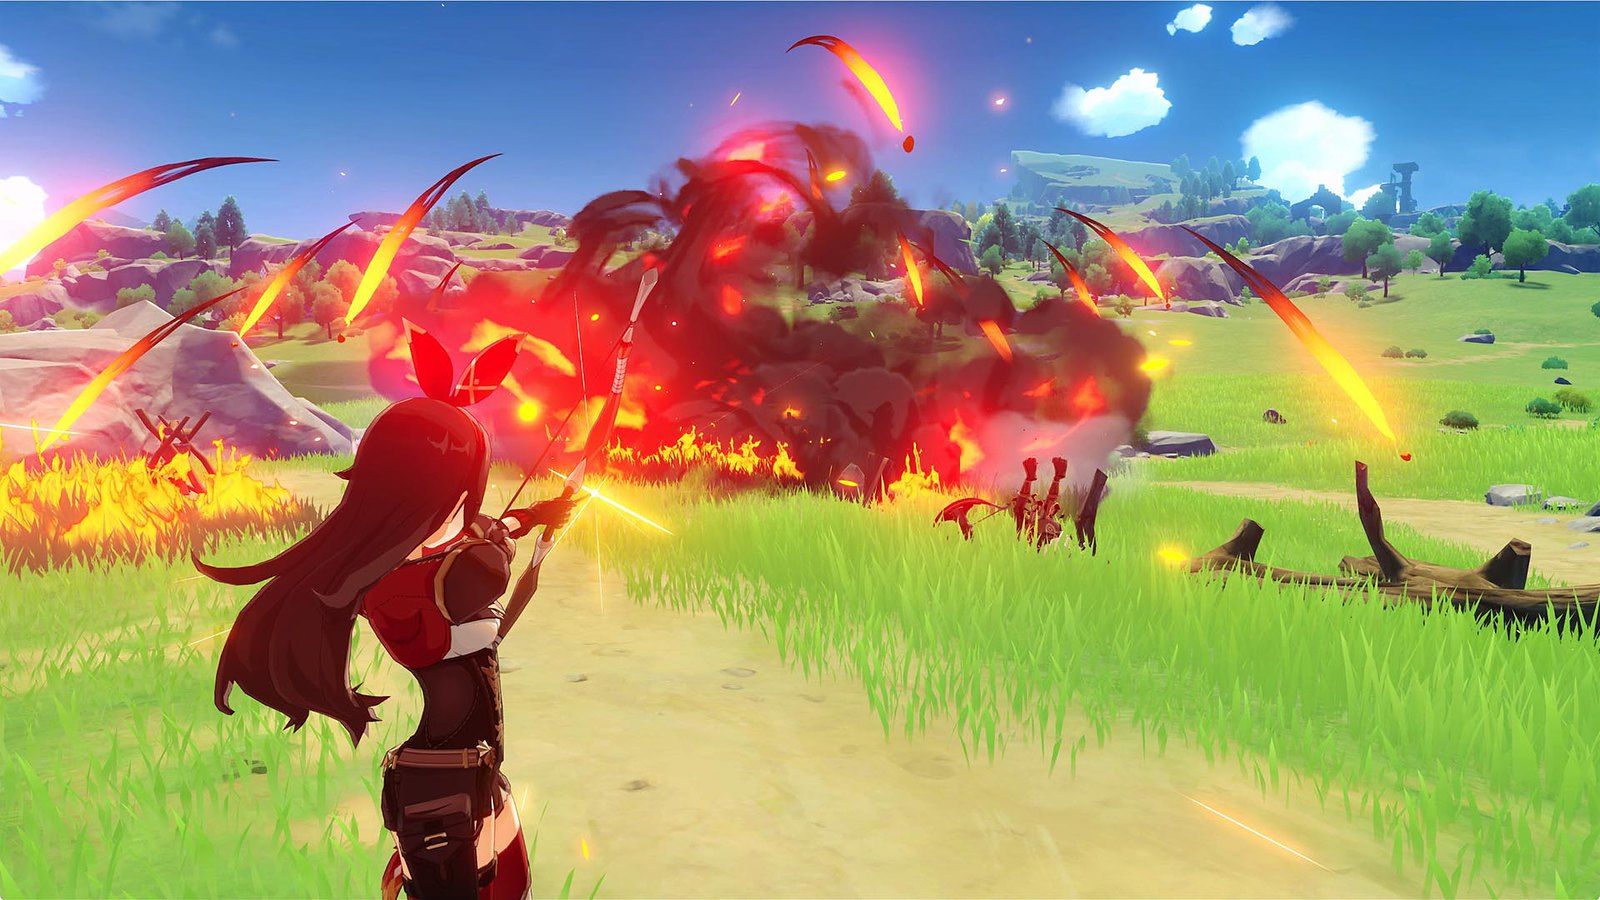 Genshin Impact is already second highest grossing game on mobile after $ 60 million launch week